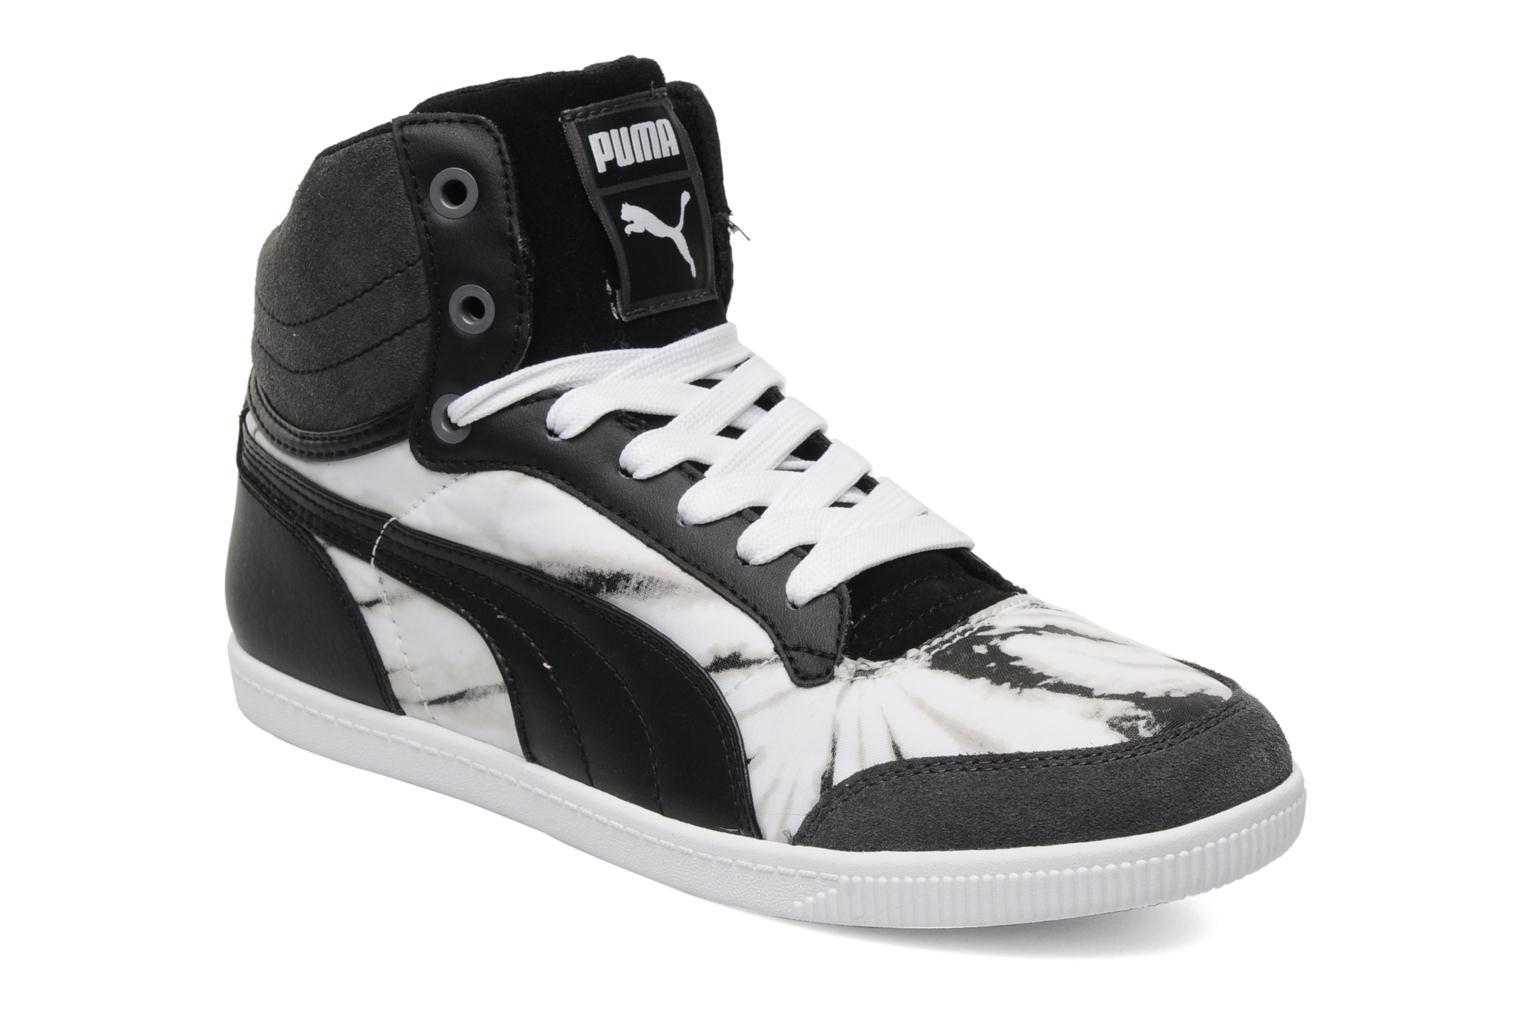 Foto Tenis moda Puma Glyde Court Dyed Wn's Mujer